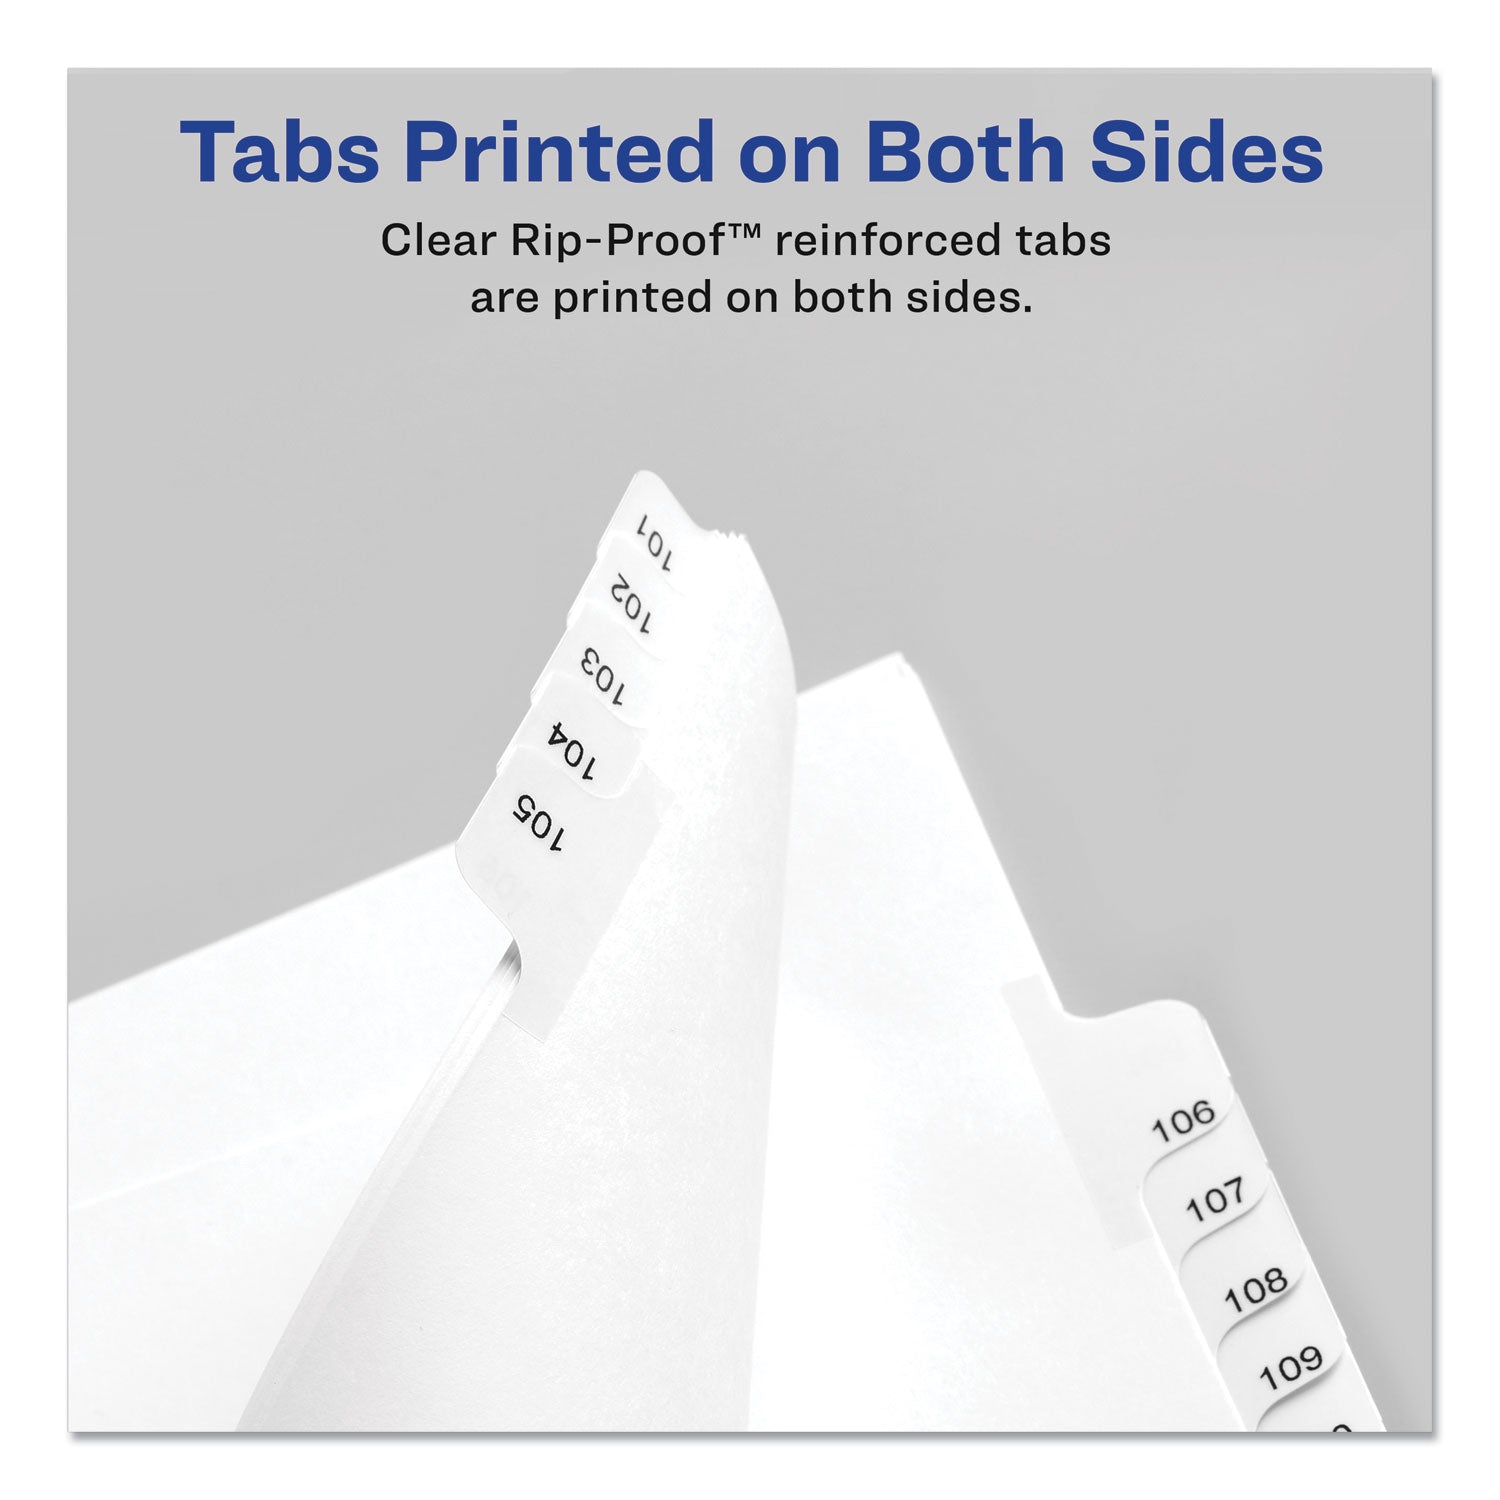 Preprinted Legal Exhibit Side Tab Index Dividers, Allstate Style, 25-Tab, 76 to 100, 11 x 8.5, White, 1 Set, (1704) - 